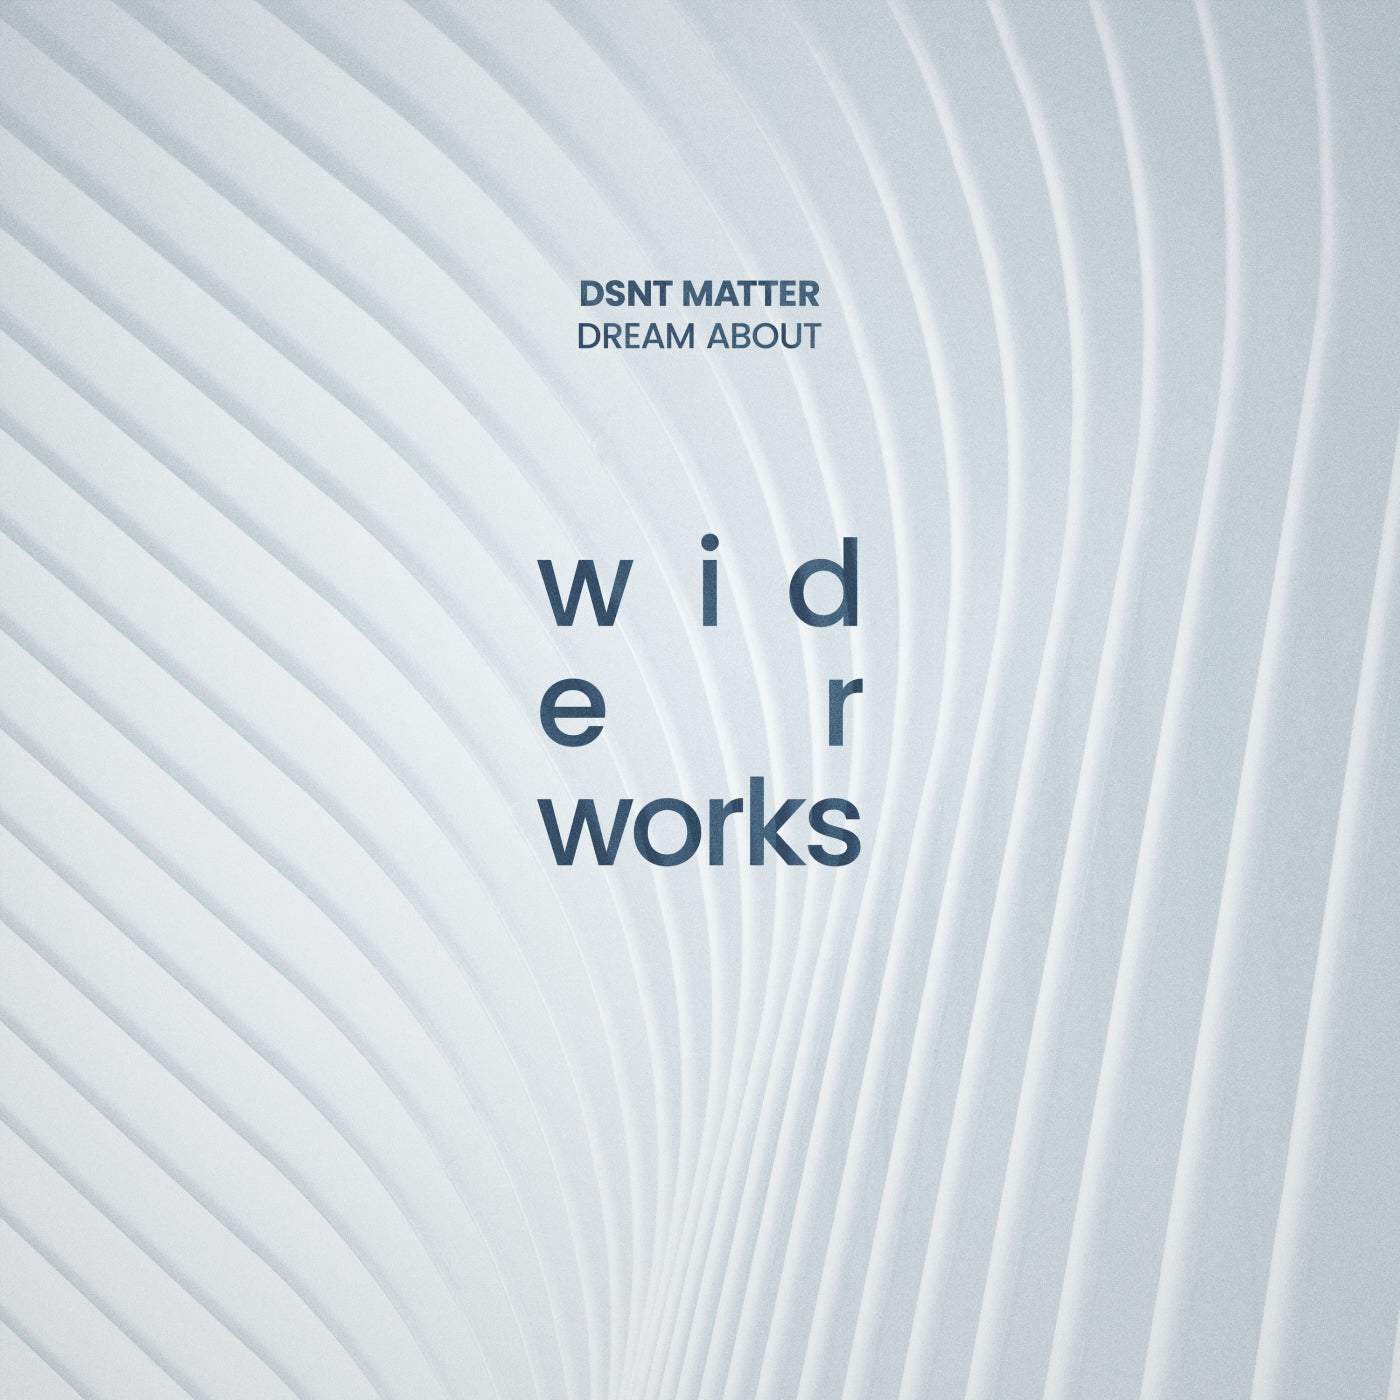 Download Dsnt Matter - Dream About on Electrobuzz